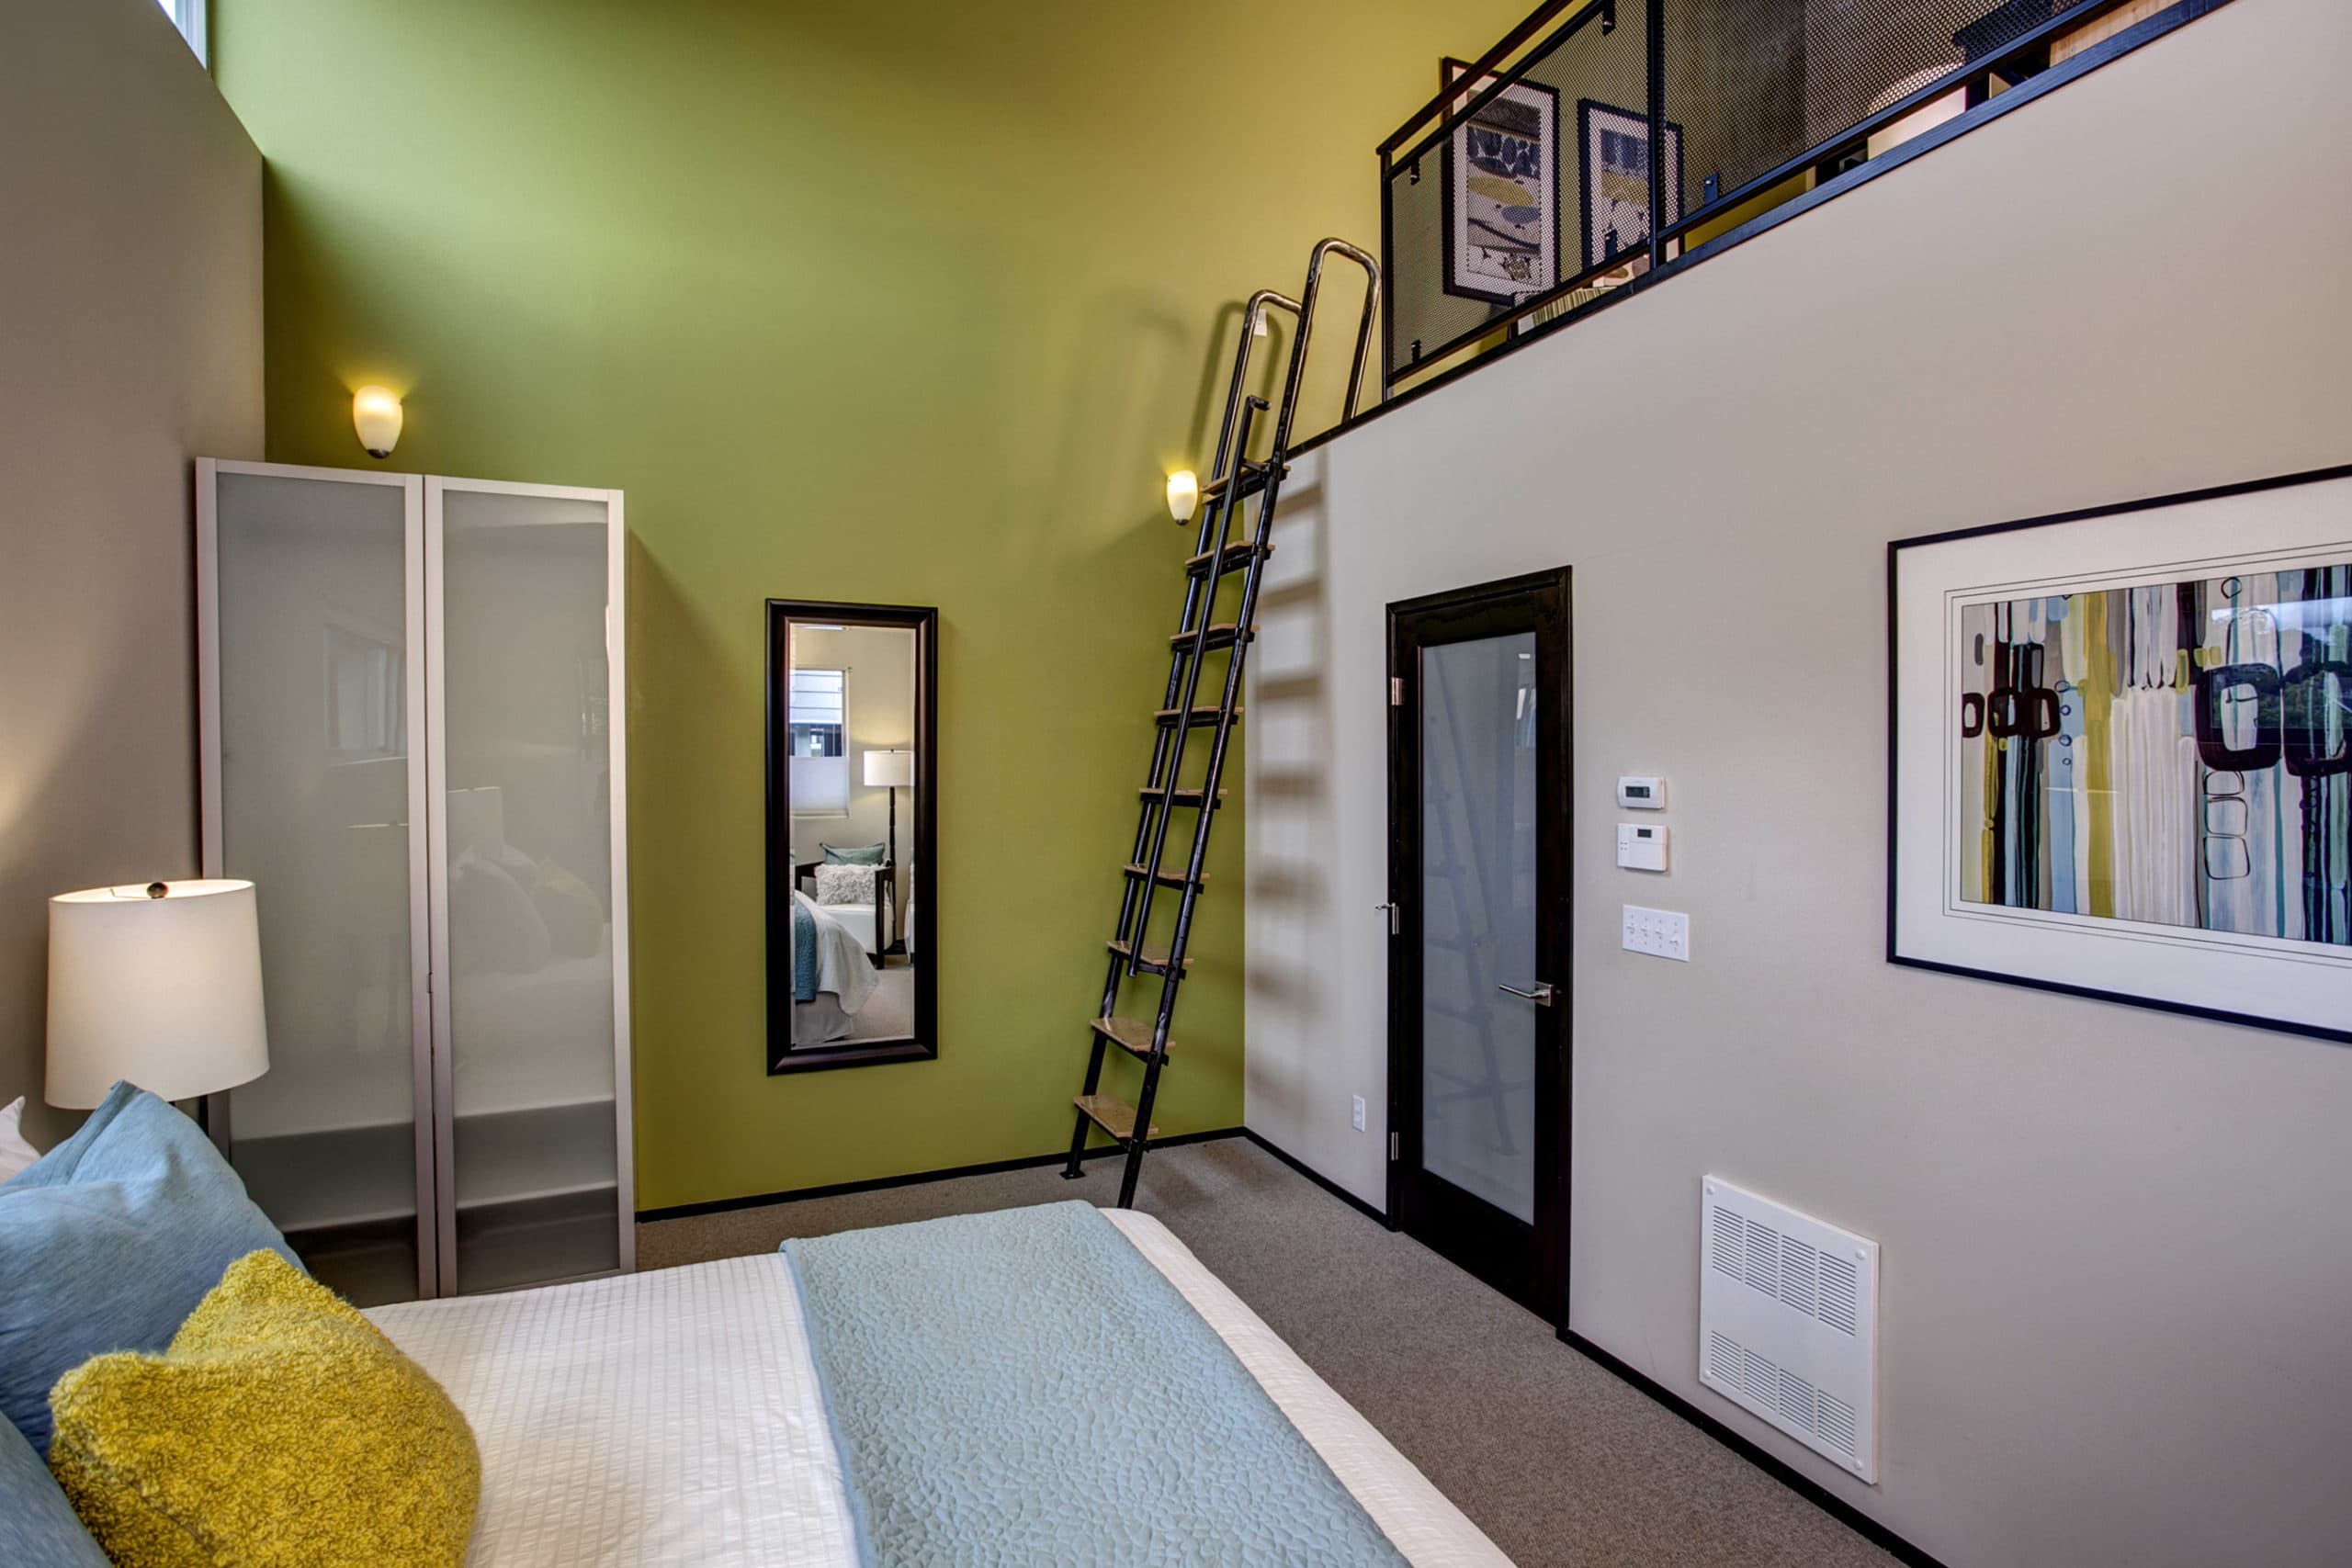 Creative development practices created a loft space in this Judkins Park Townhome.